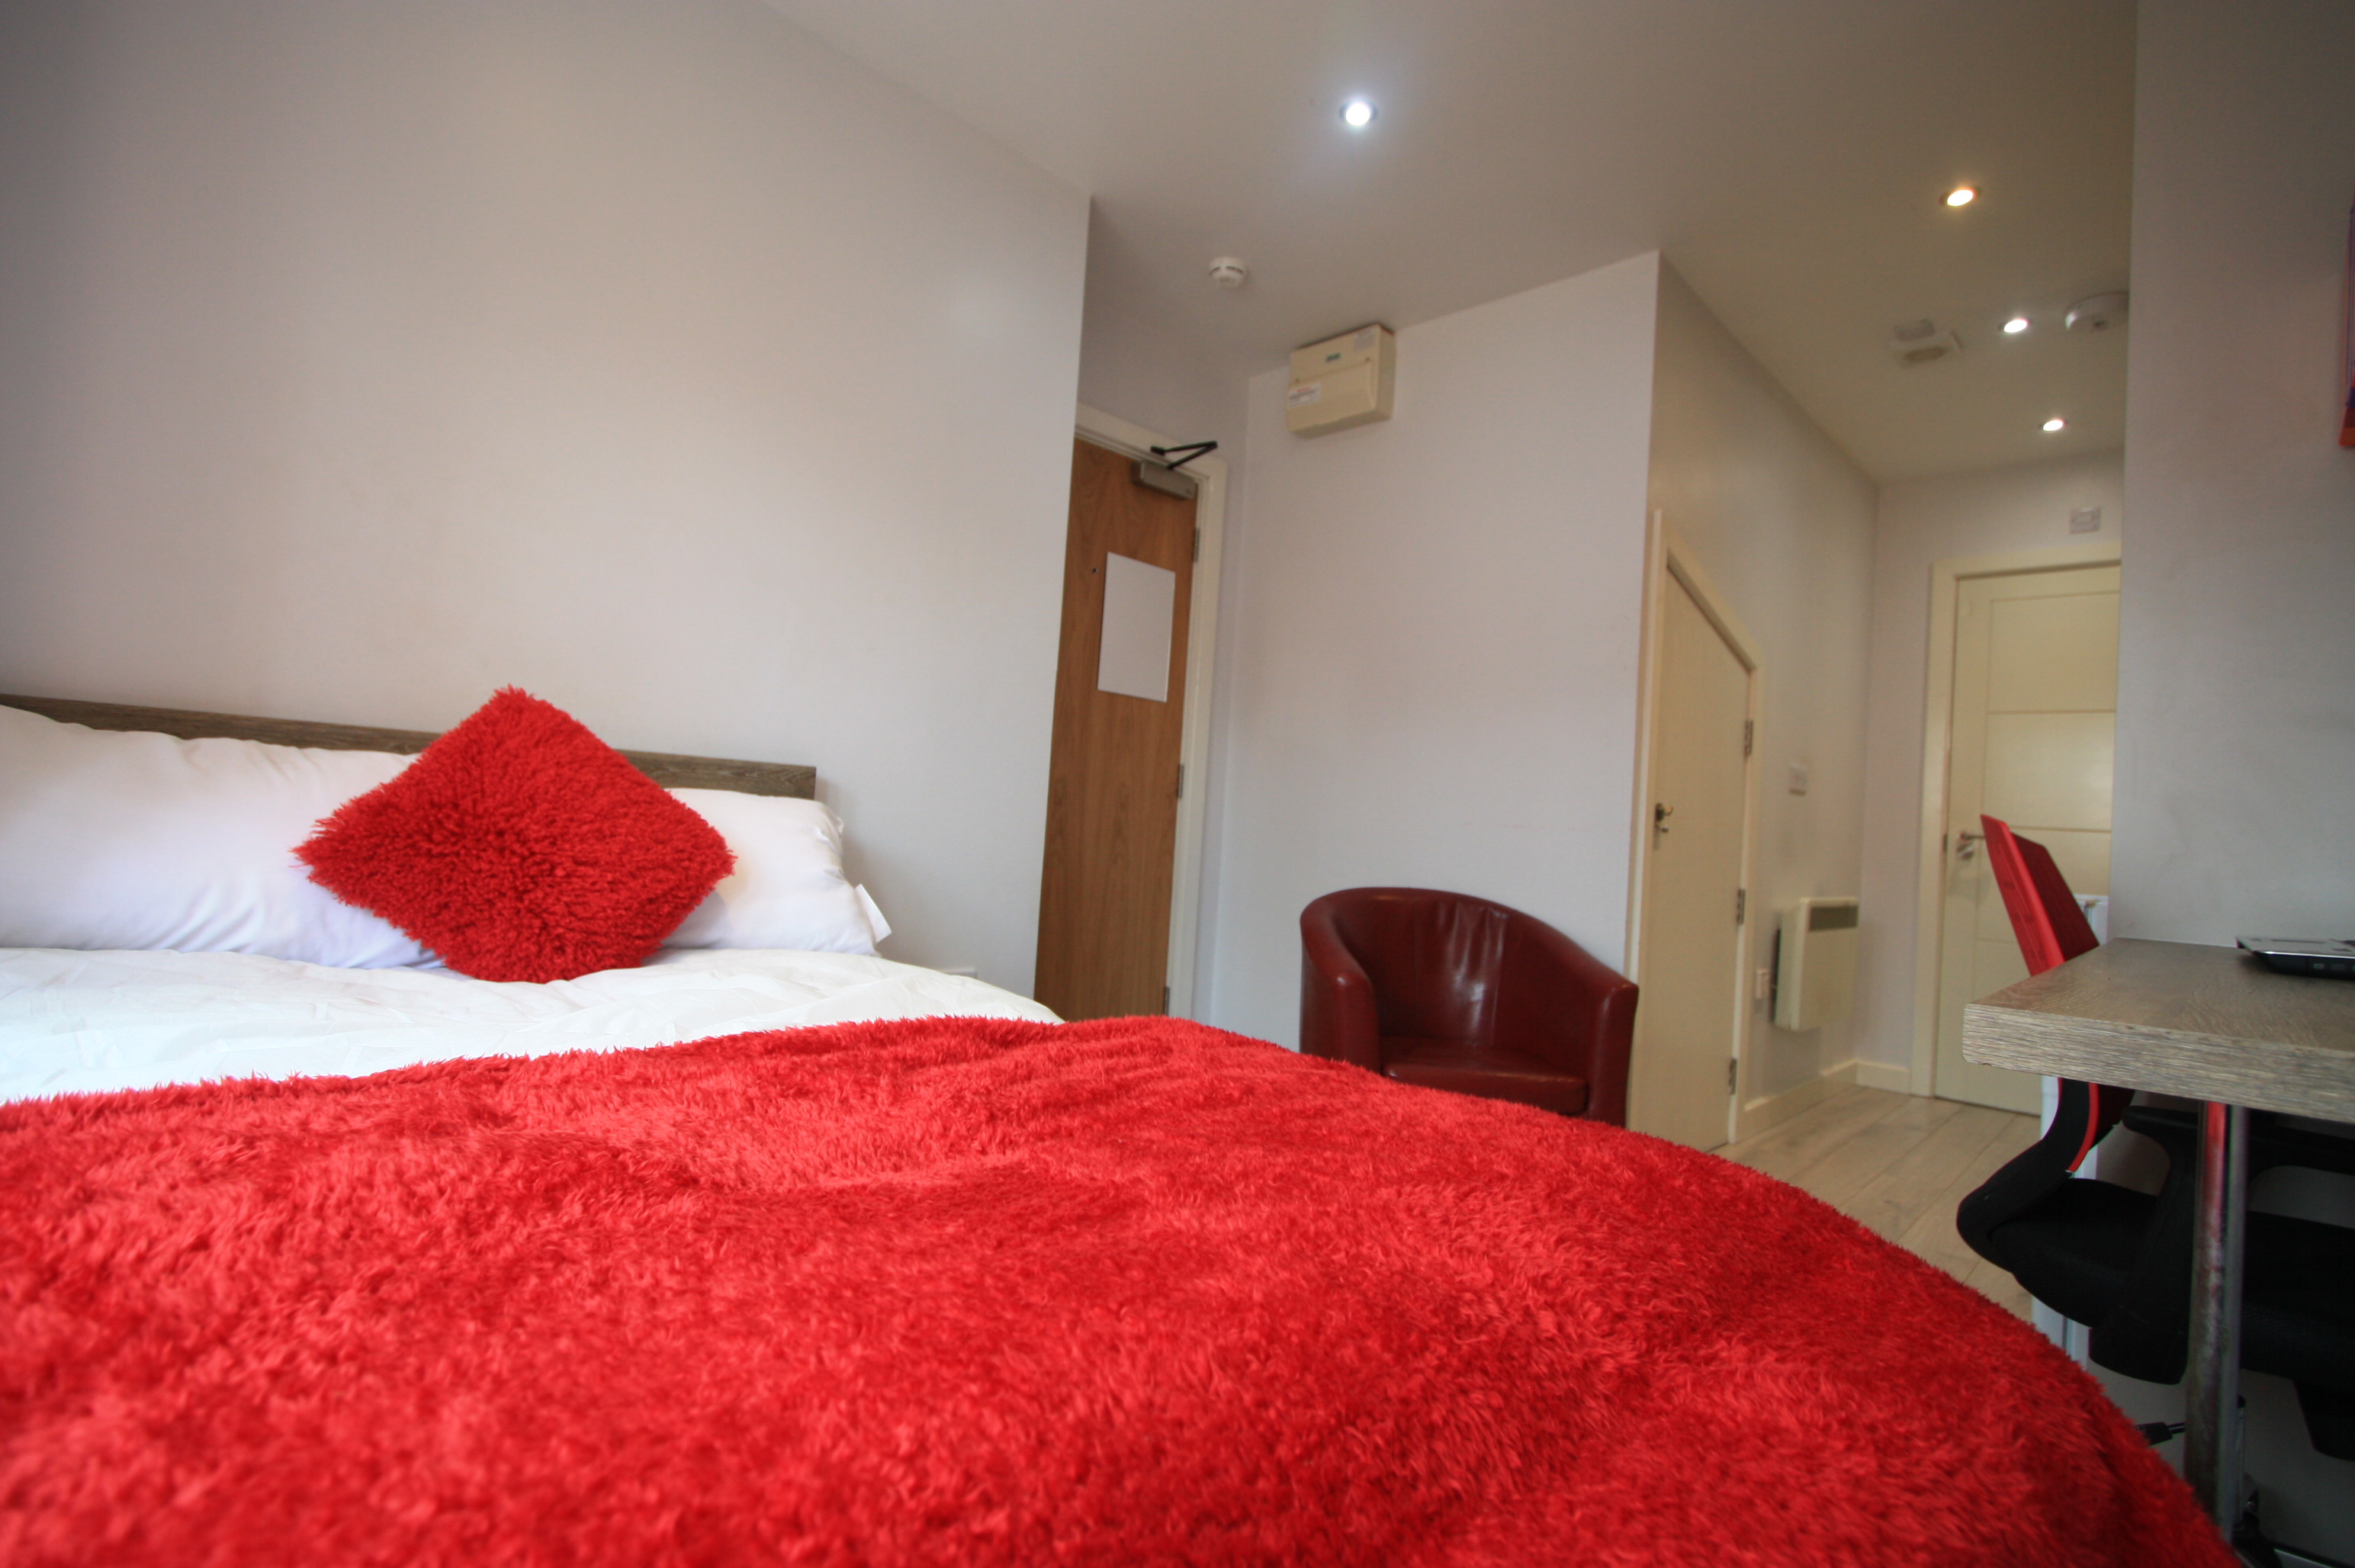 Student Accommodation for Couples